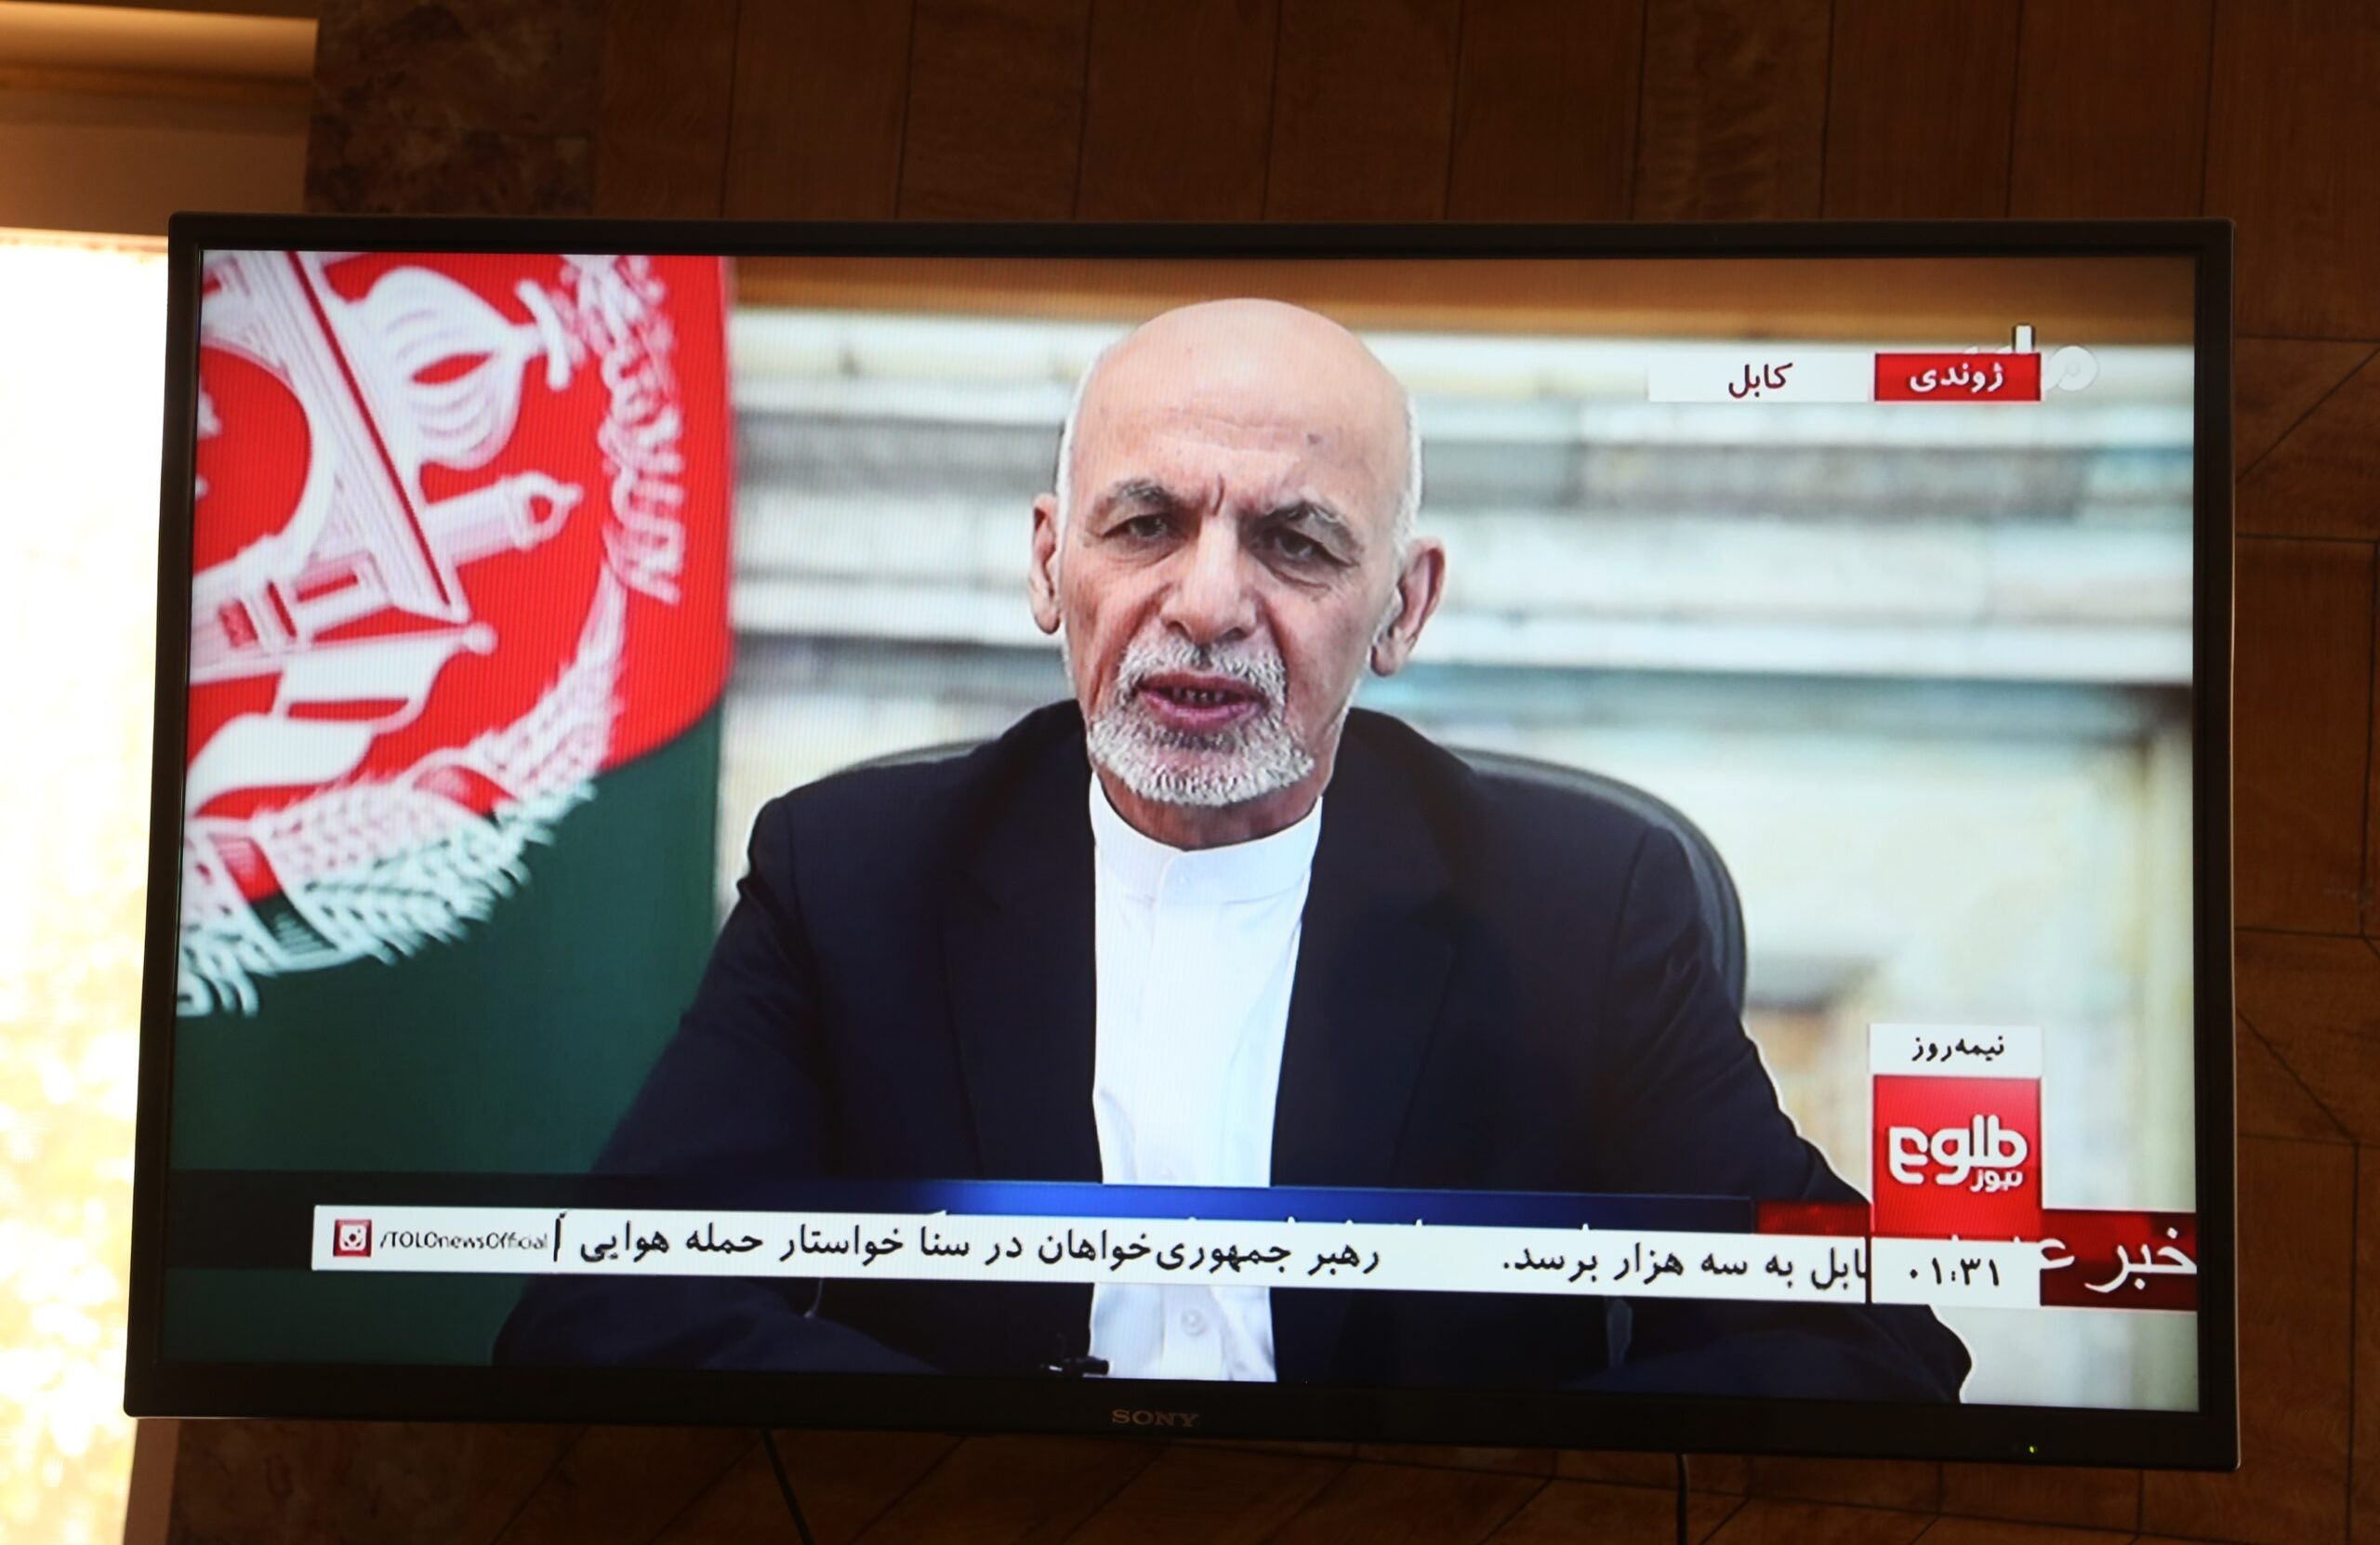 Afghan president Mohammad Ashraf Ghani speaks in a televised address in Kabul, capital of Afghanistan, Aug. 14, 2021. President Ghani on Saturday vowed to prevent instability in his war-battered country amid the intensified fighting and Taliban's advance towards major cities. (Photo by Rahmatullah Alizadah/Xinhua via Getty Images)